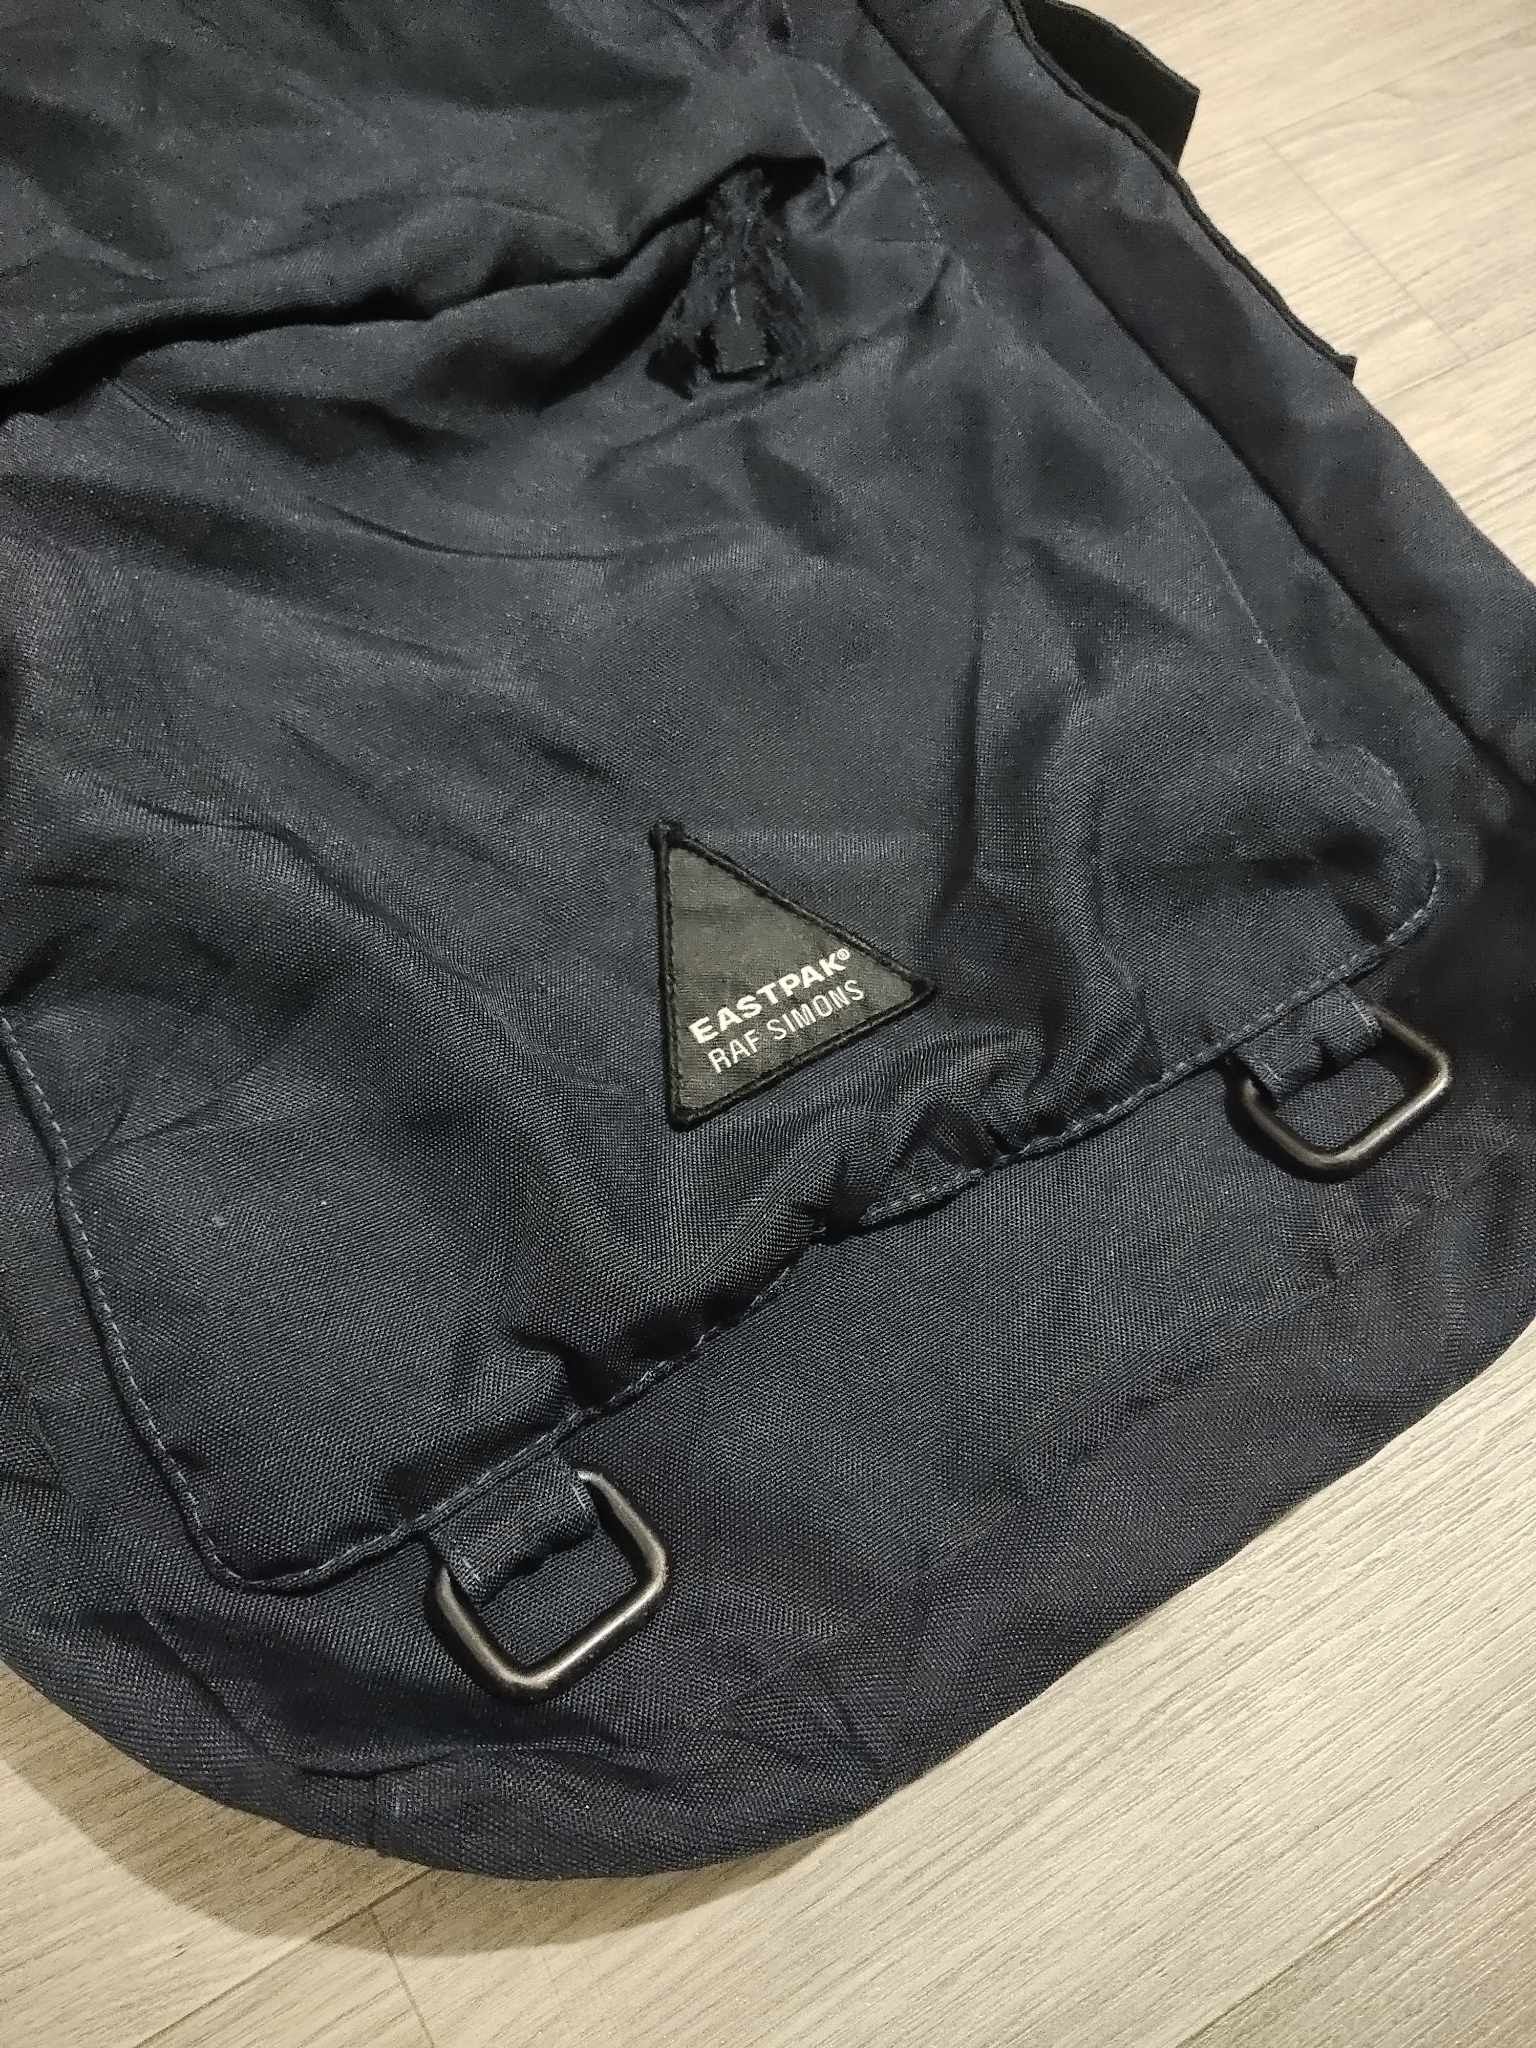 Raf Simons EASTPAK - RAF SIMONS - F/W 08 - Crinkled Flap Sling Bag Size ONE SIZE - 2 Preview